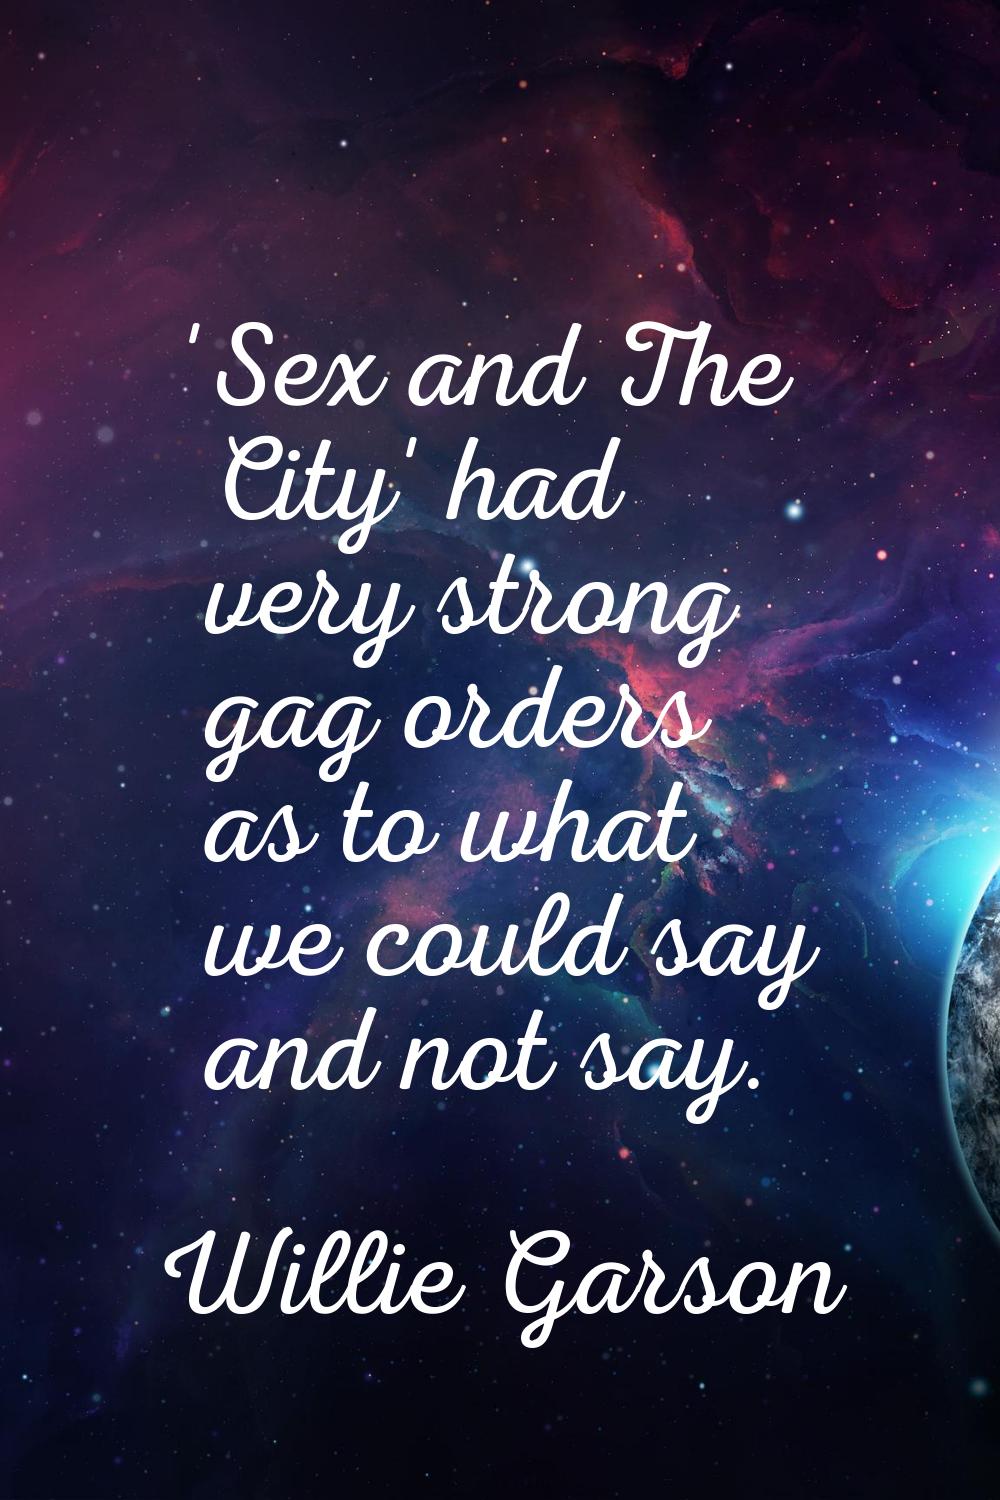 'Sex and The City' had very strong gag orders as to what we could say and not say.